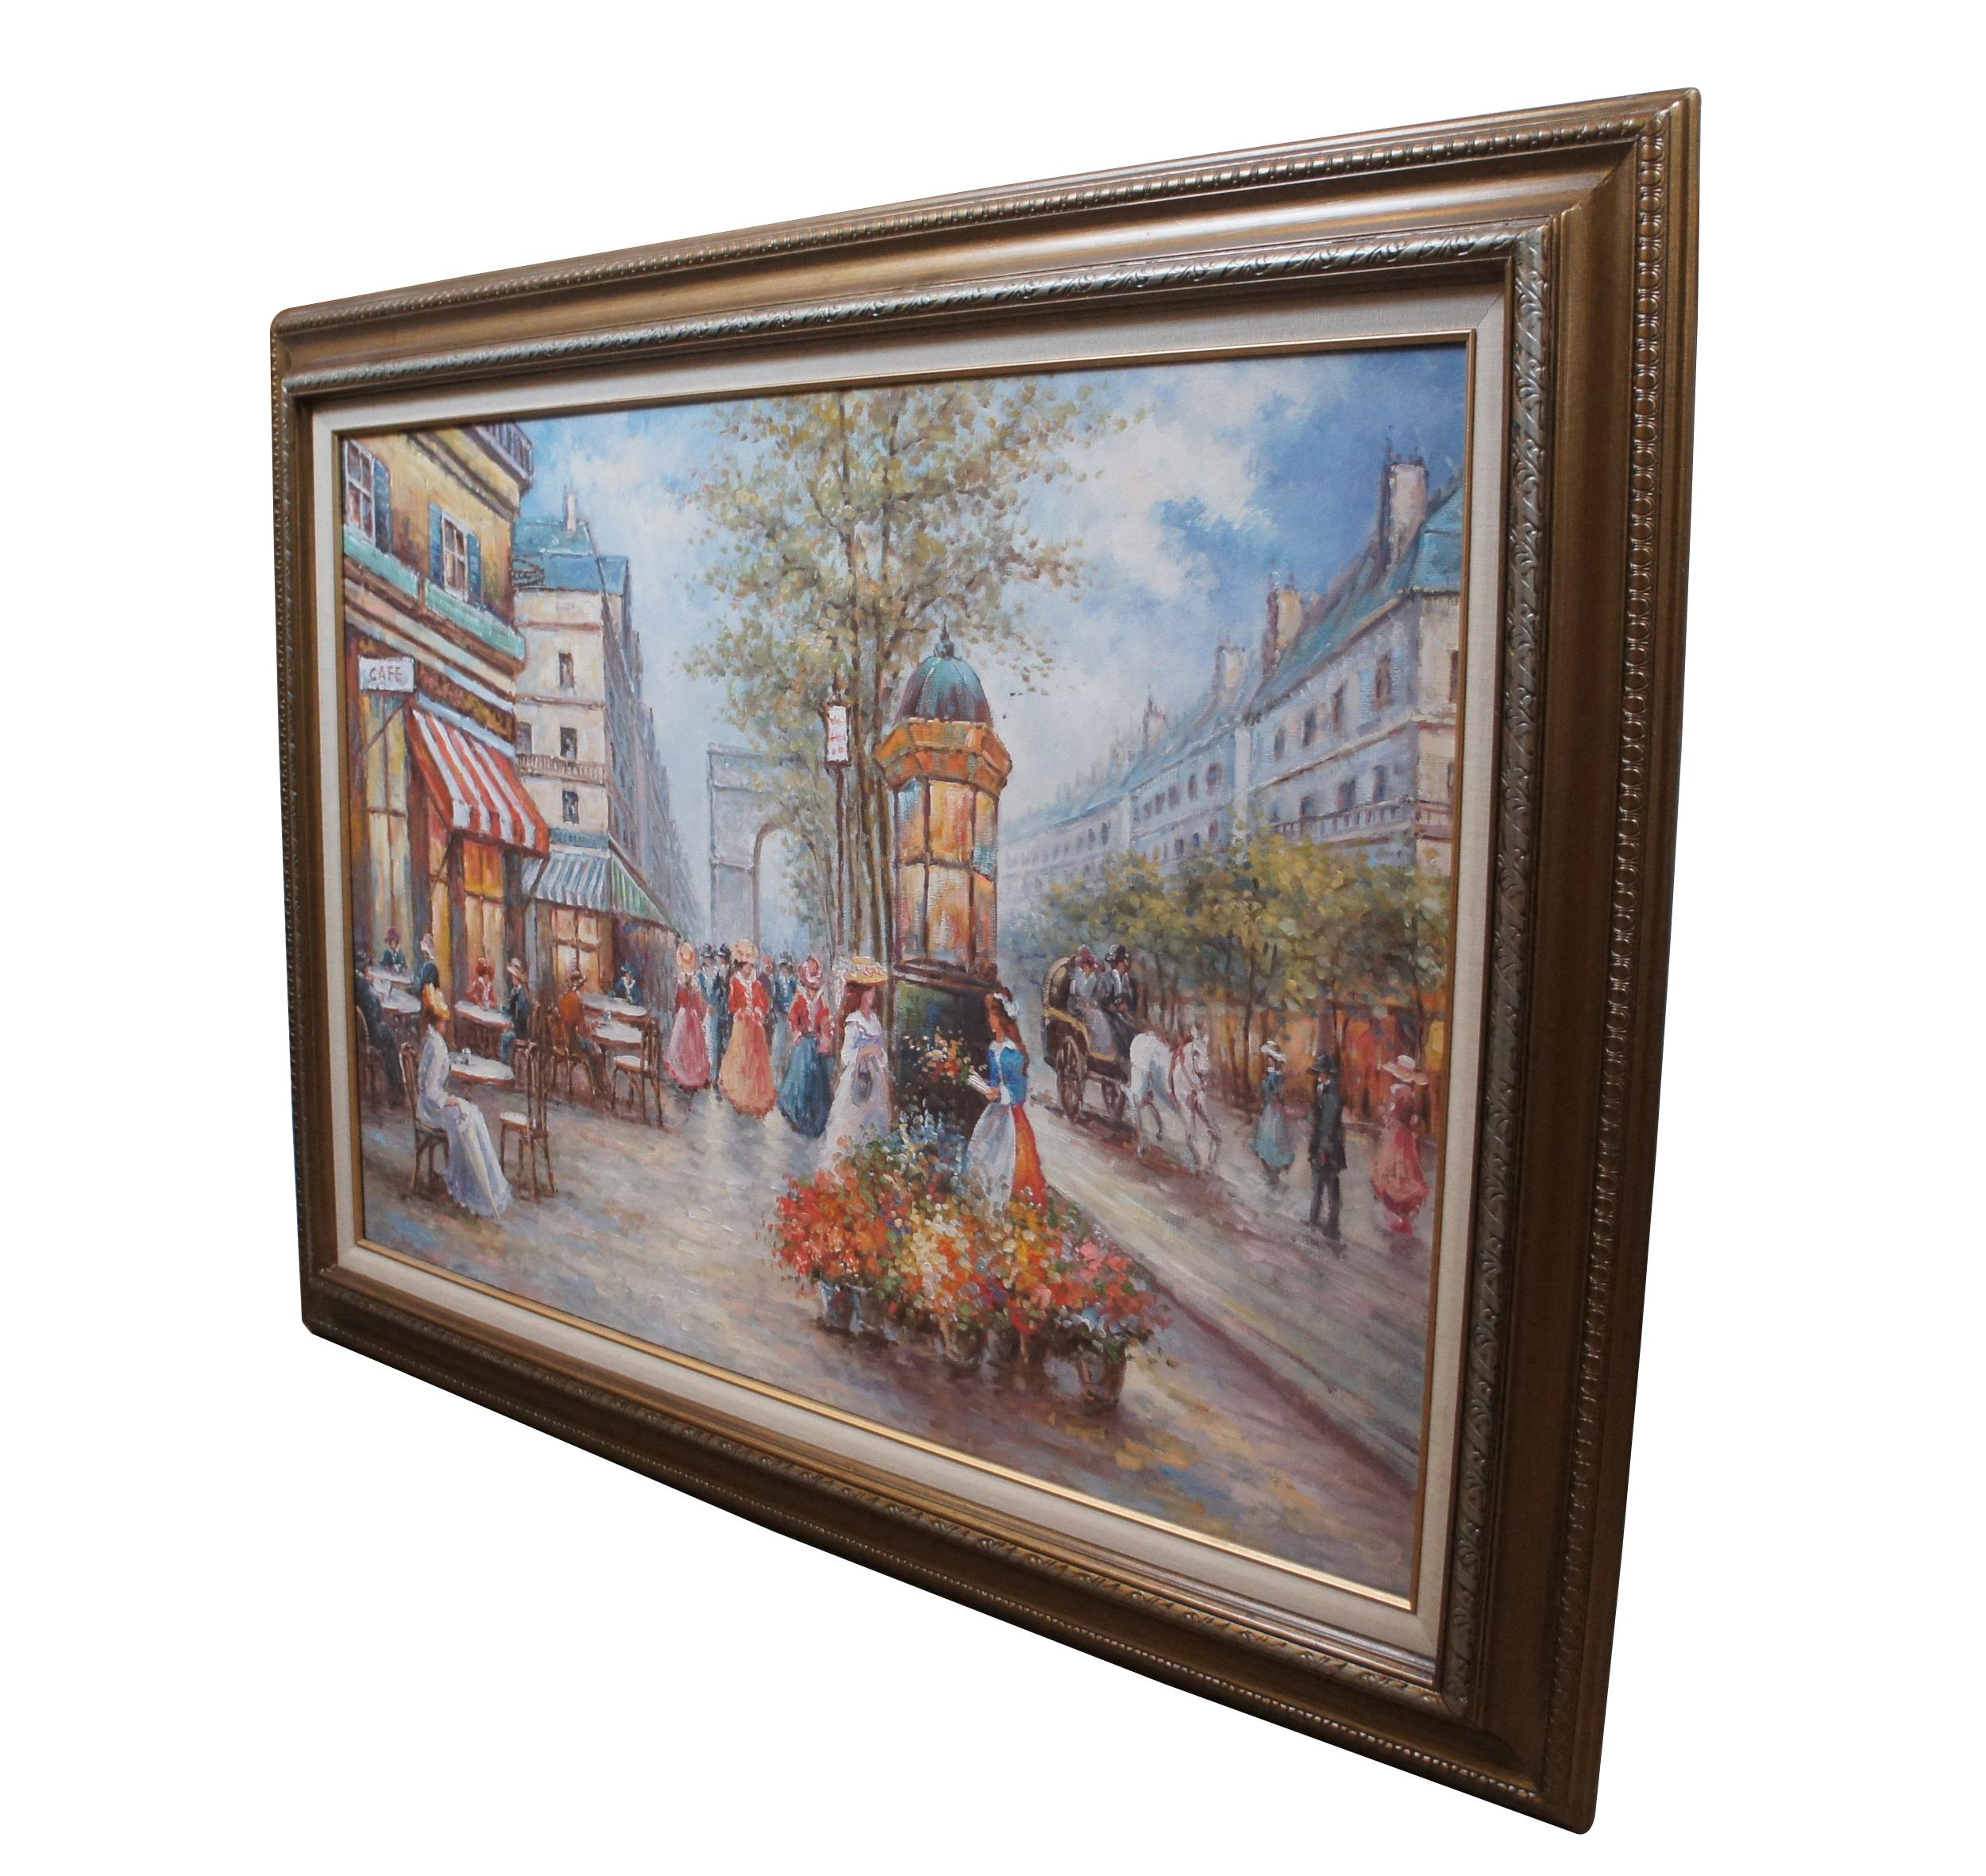 Vintage oil on canvas impressionist painting showing a cityscape / street scene of a cafe lined street in Paris, viewing the Arc de Triomphe filled with figures in Victorian dress. Gilded beveled frame with simple carved details, white linen mat and